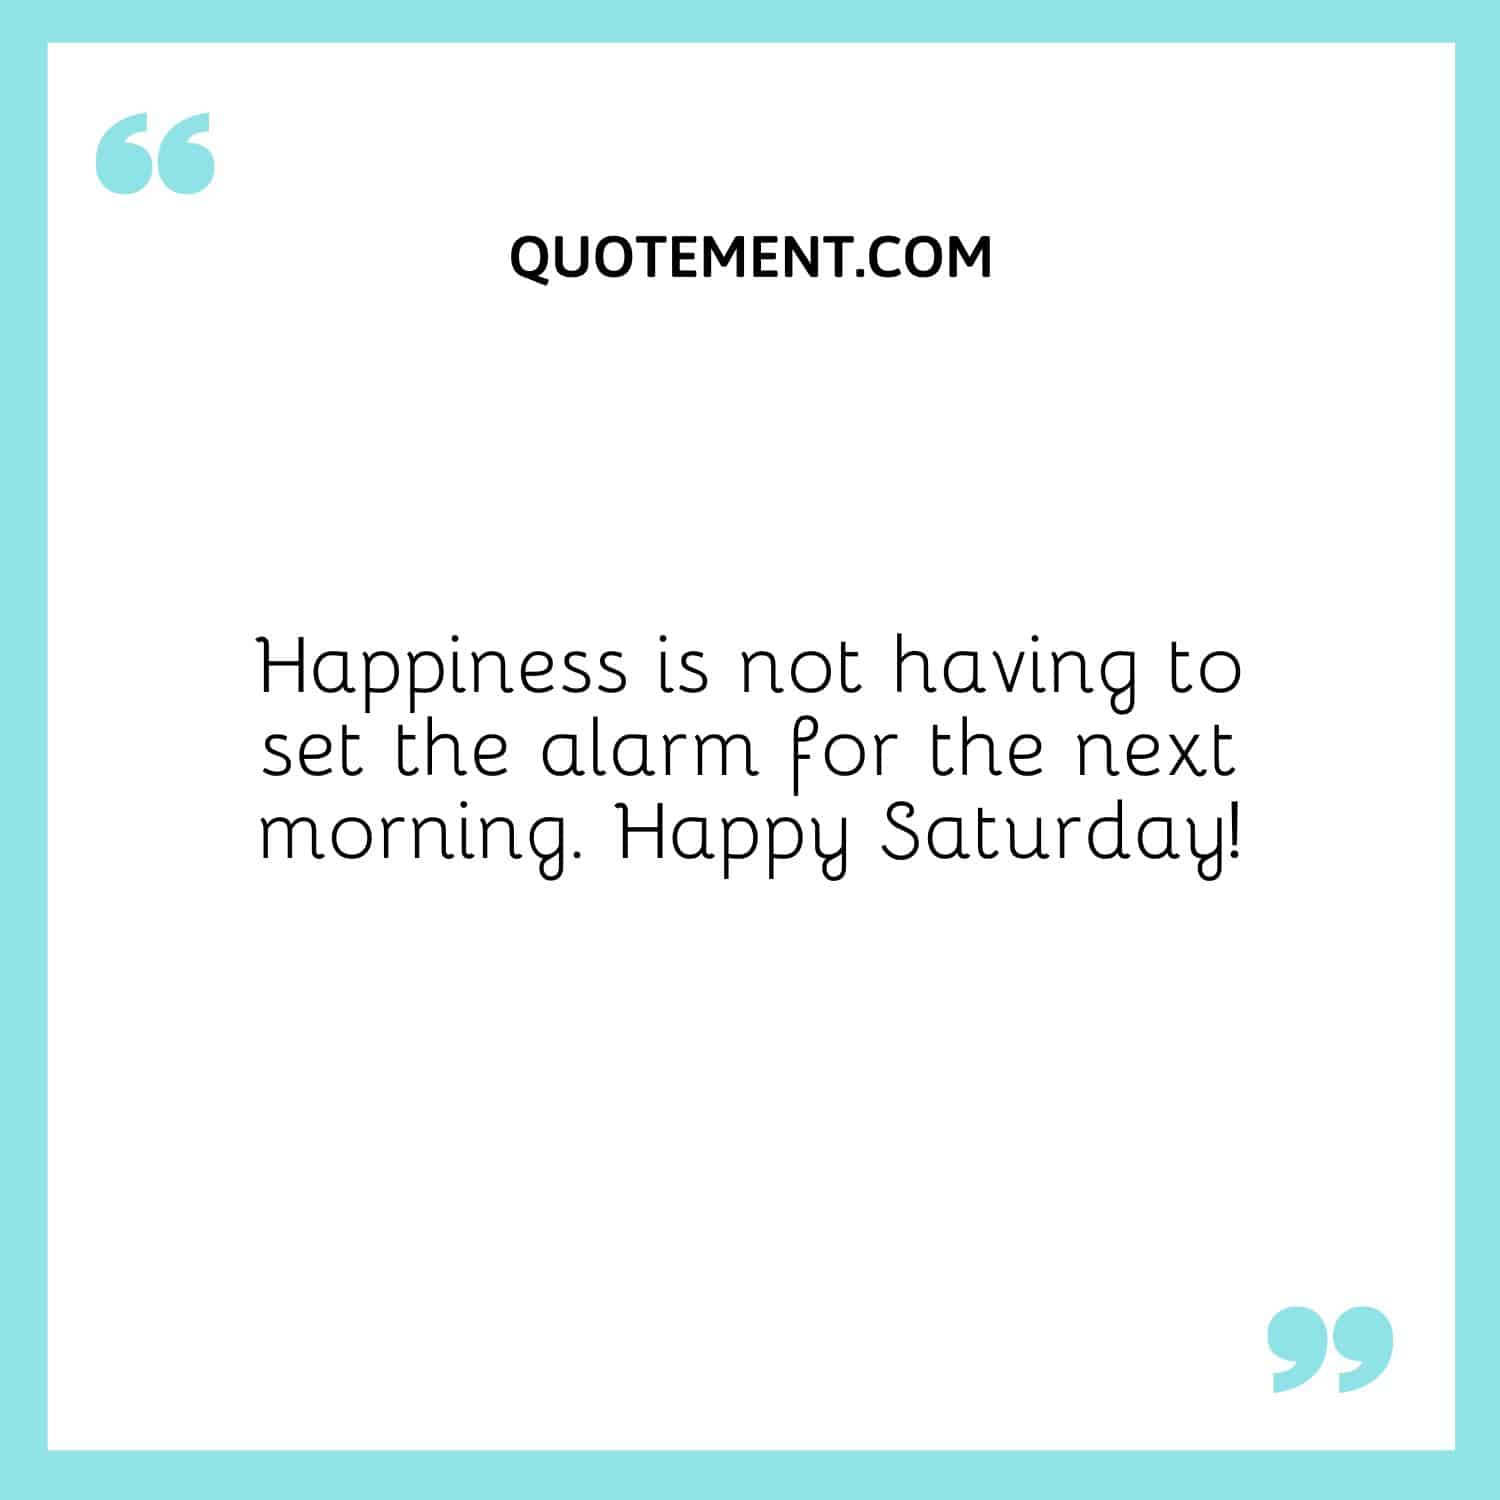 Happiness is not having to set the alarm for the next morning.